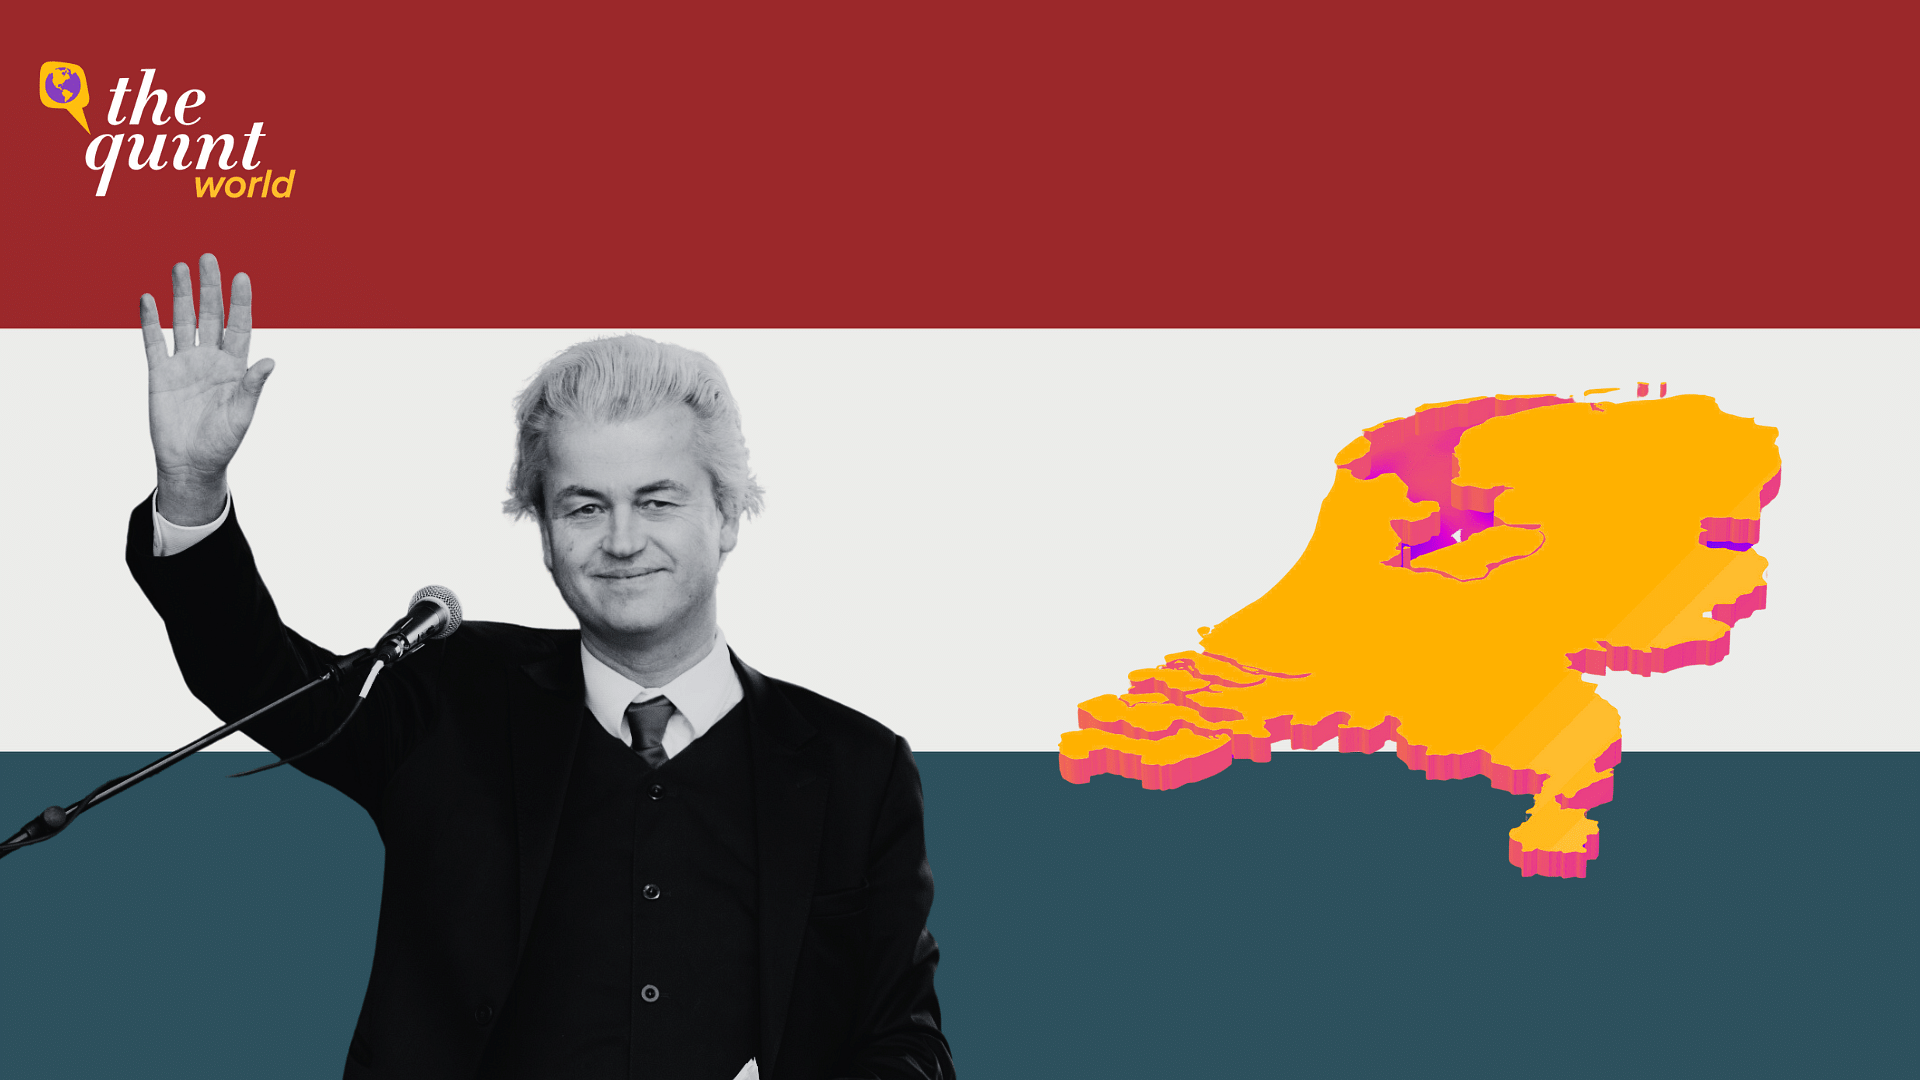 <div class="paragraphs"><p>Wilders will only be able to hold office if he is able to form a coalition with other mainstream parties. He needs 76 out of 150 seats to form a government.</p></div>